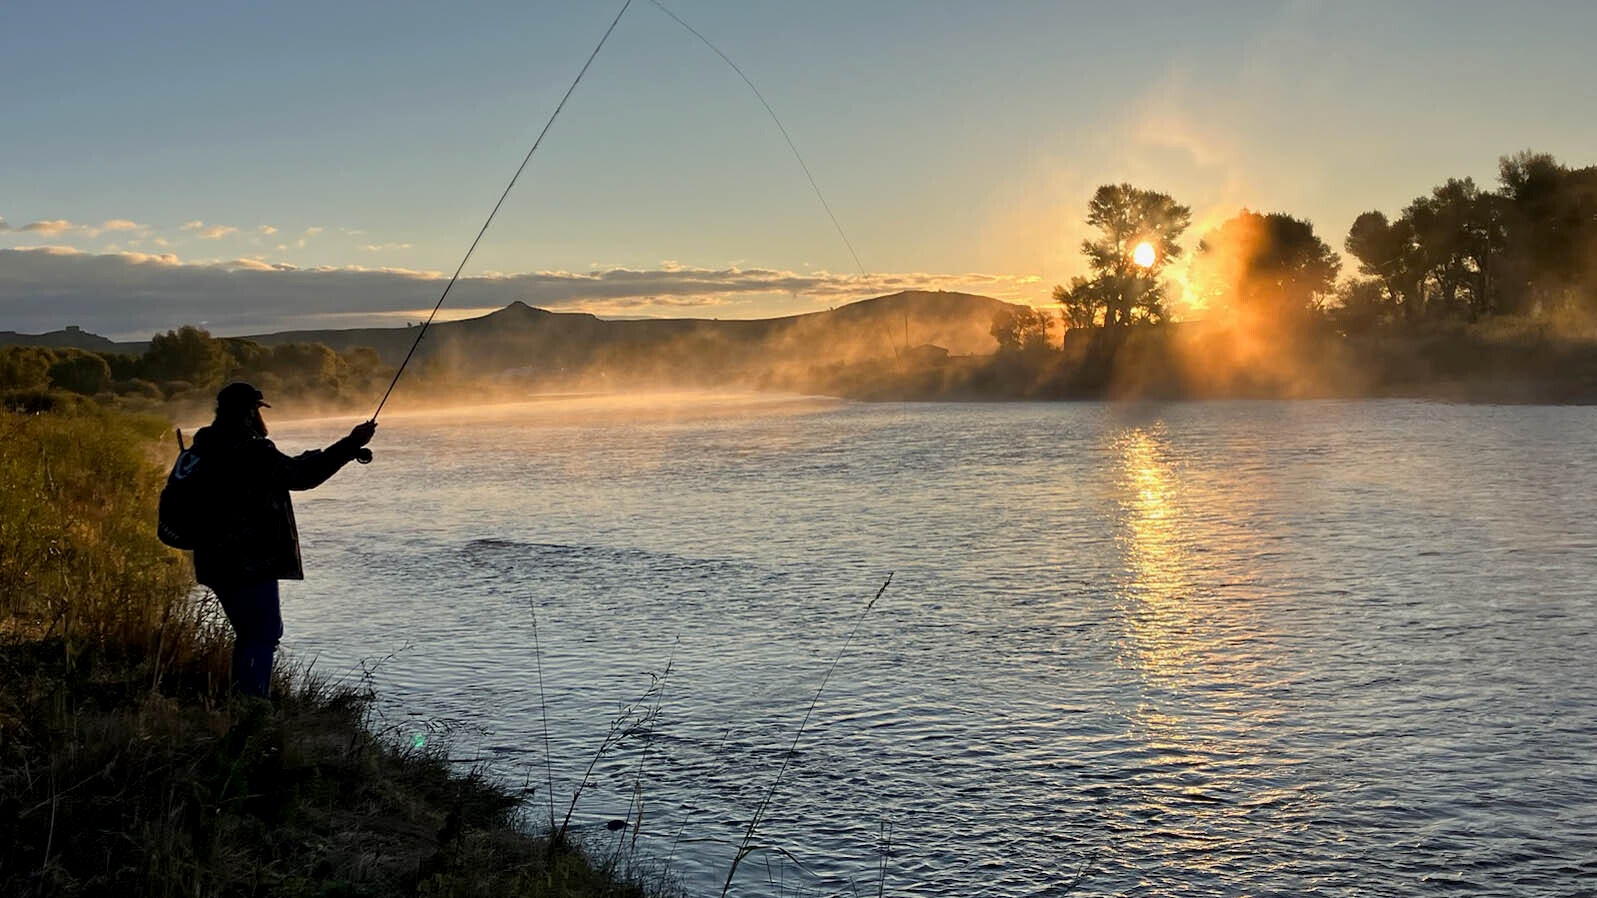 Fishing on the Green River at sunrise near Big Piney, Wyoming on Sept. 23, 2023.